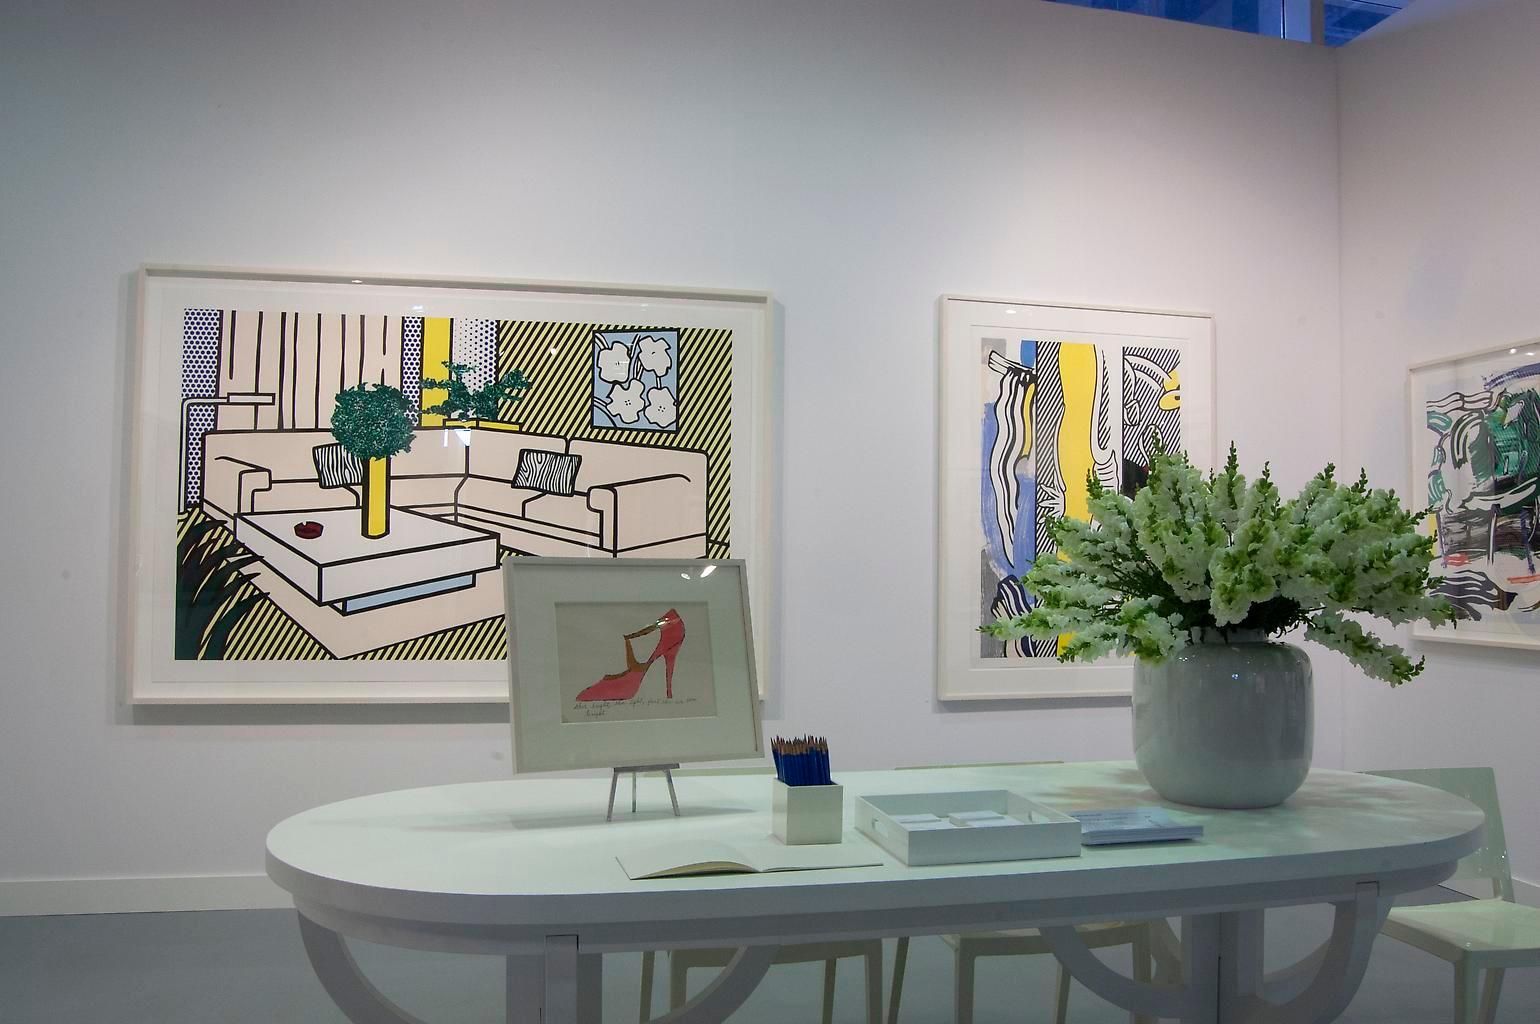 The Armory Show 2014 by Susan Sheehan Gallery